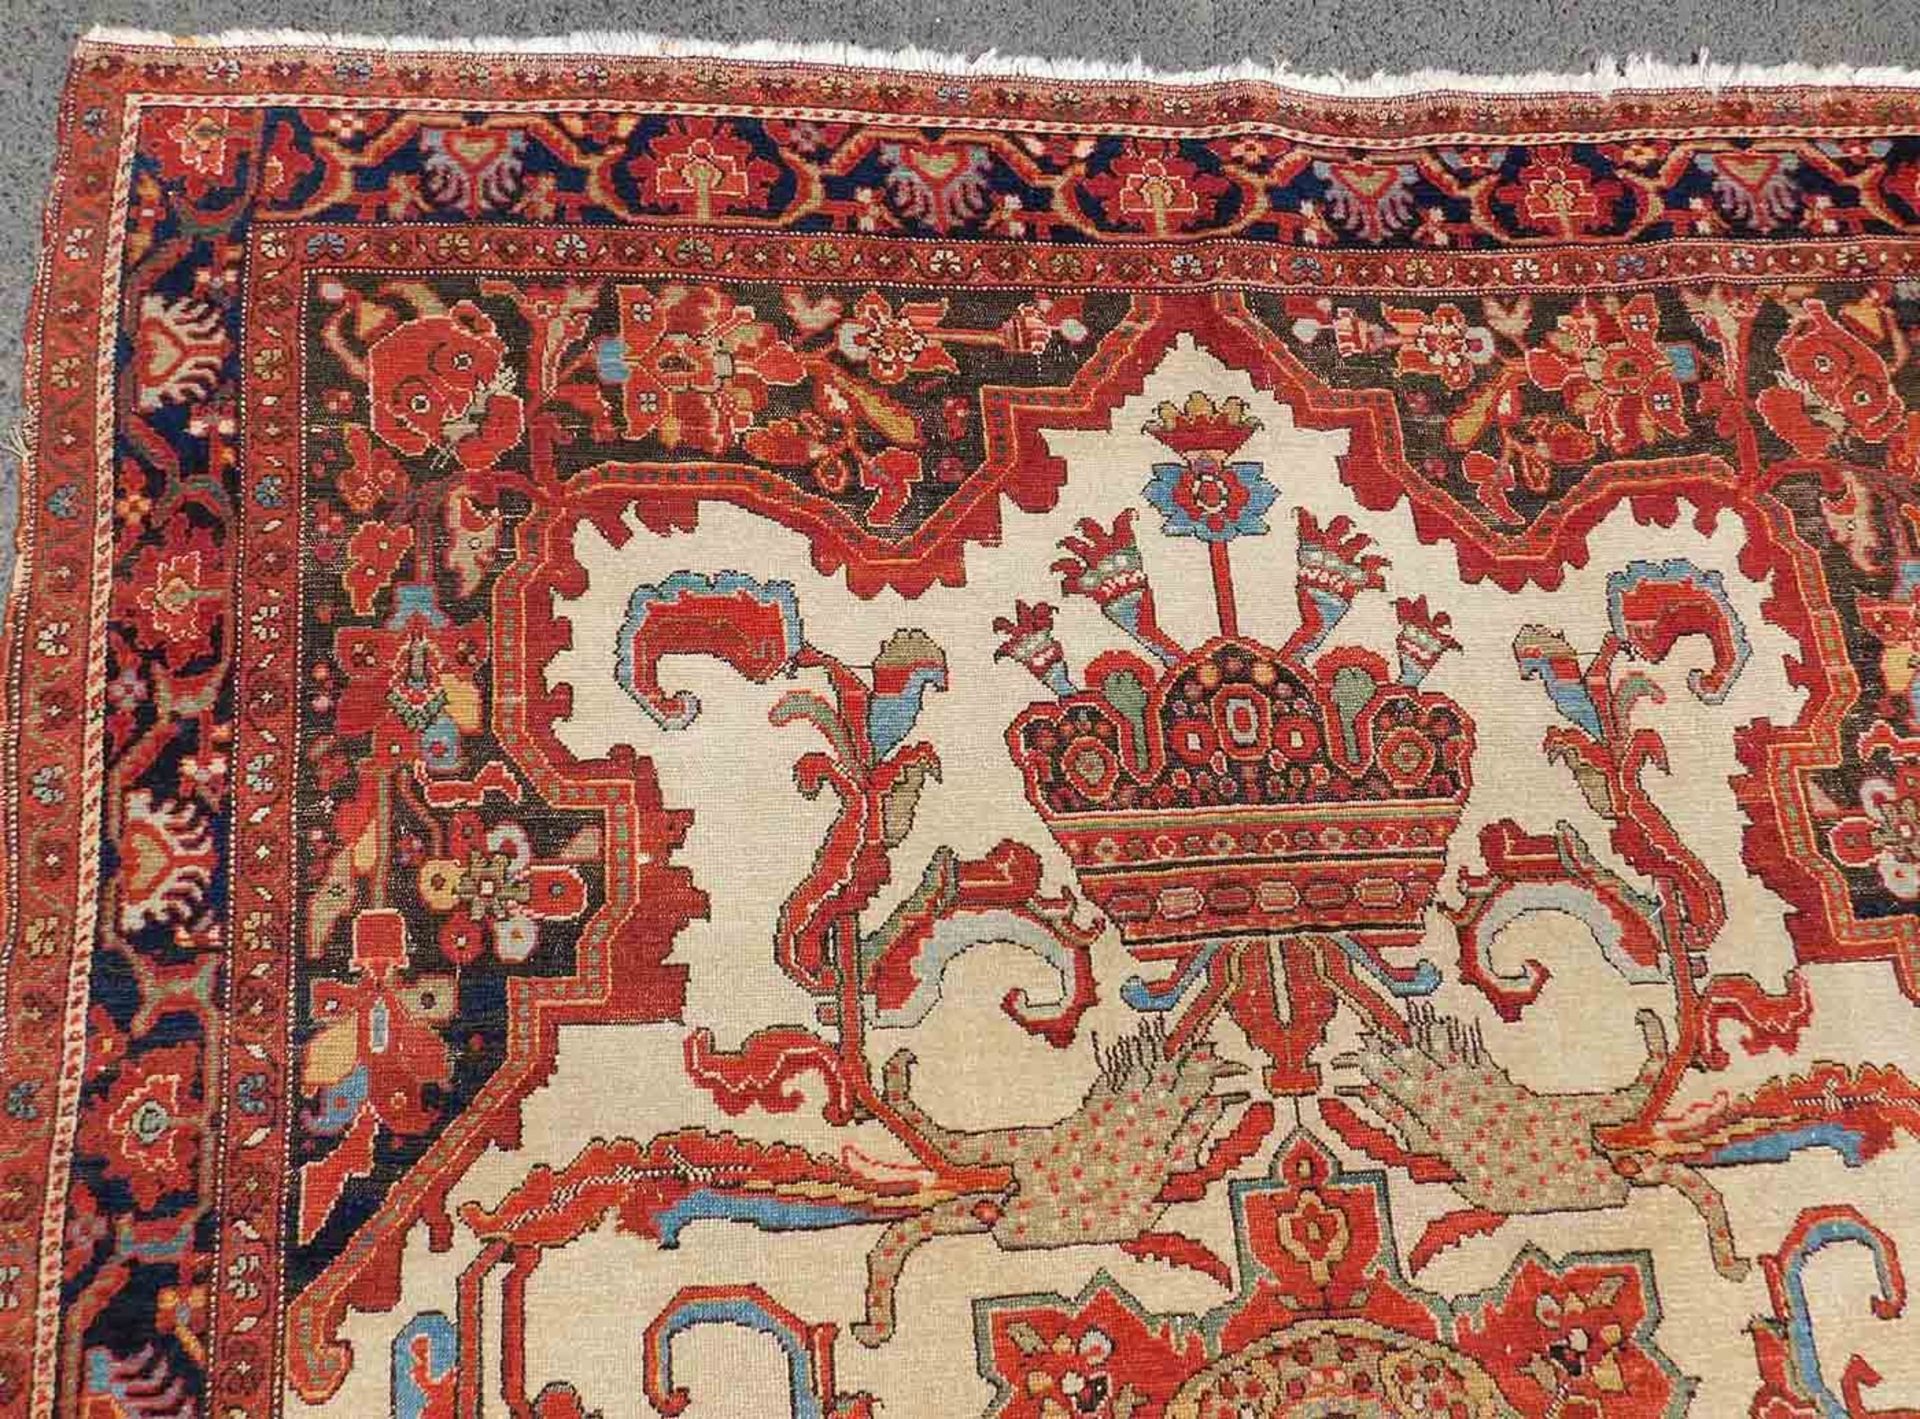 Mishan Malayer Persian rug. Iran. Antique, around 1880.191 cm x 143 cm. Knotted by hand. Wool on - Image 9 of 12